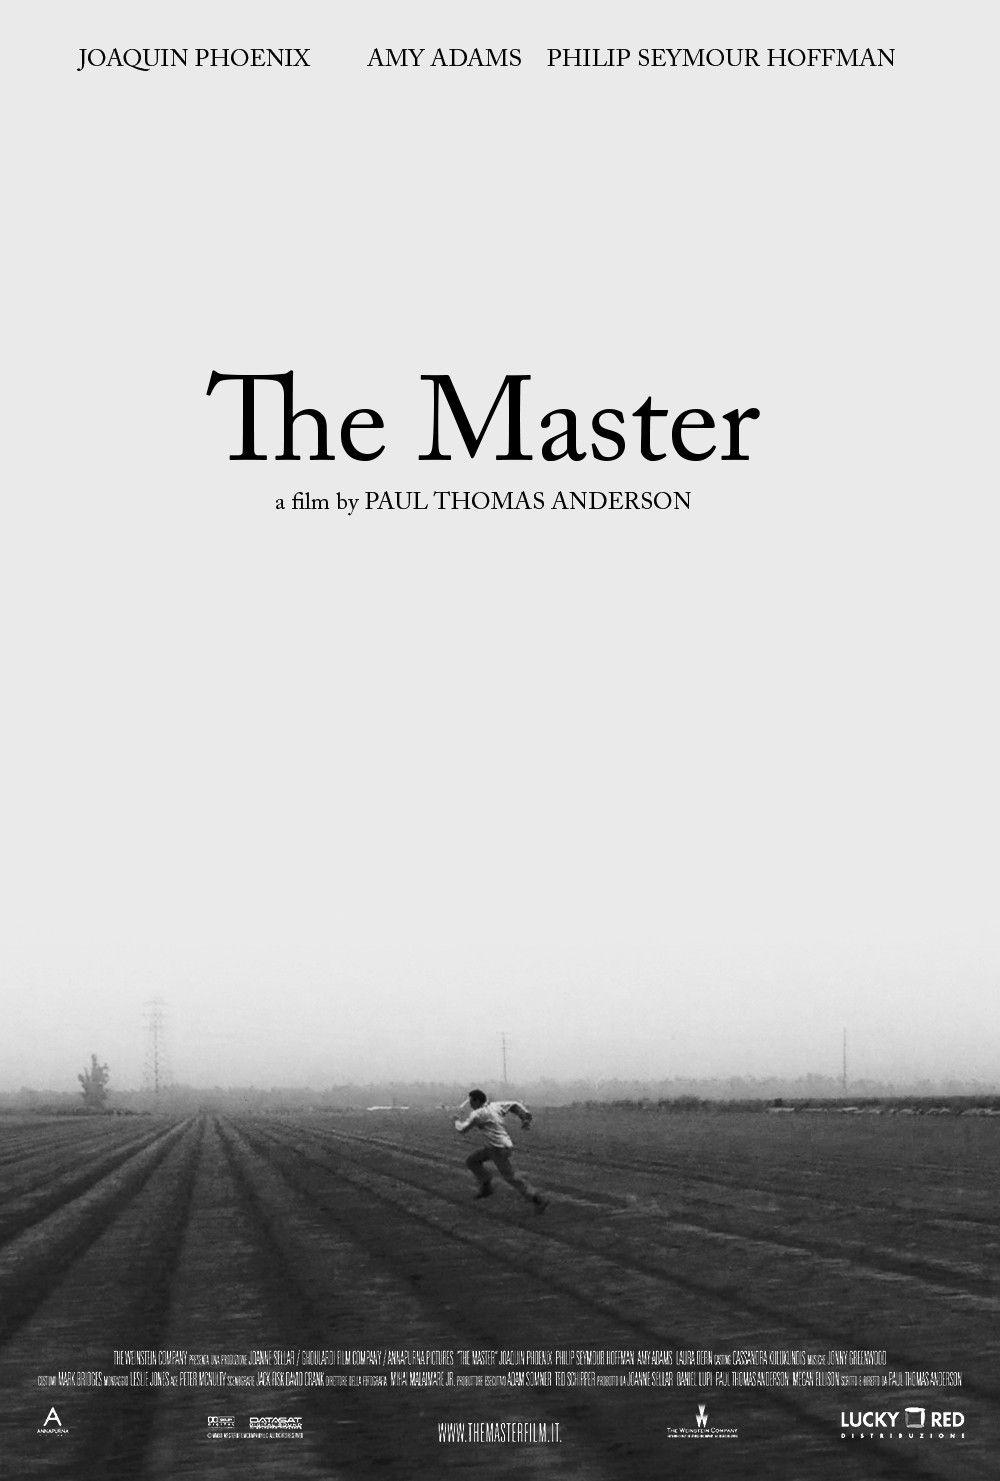 The Master (My personal phone wallpaper). Movie posters